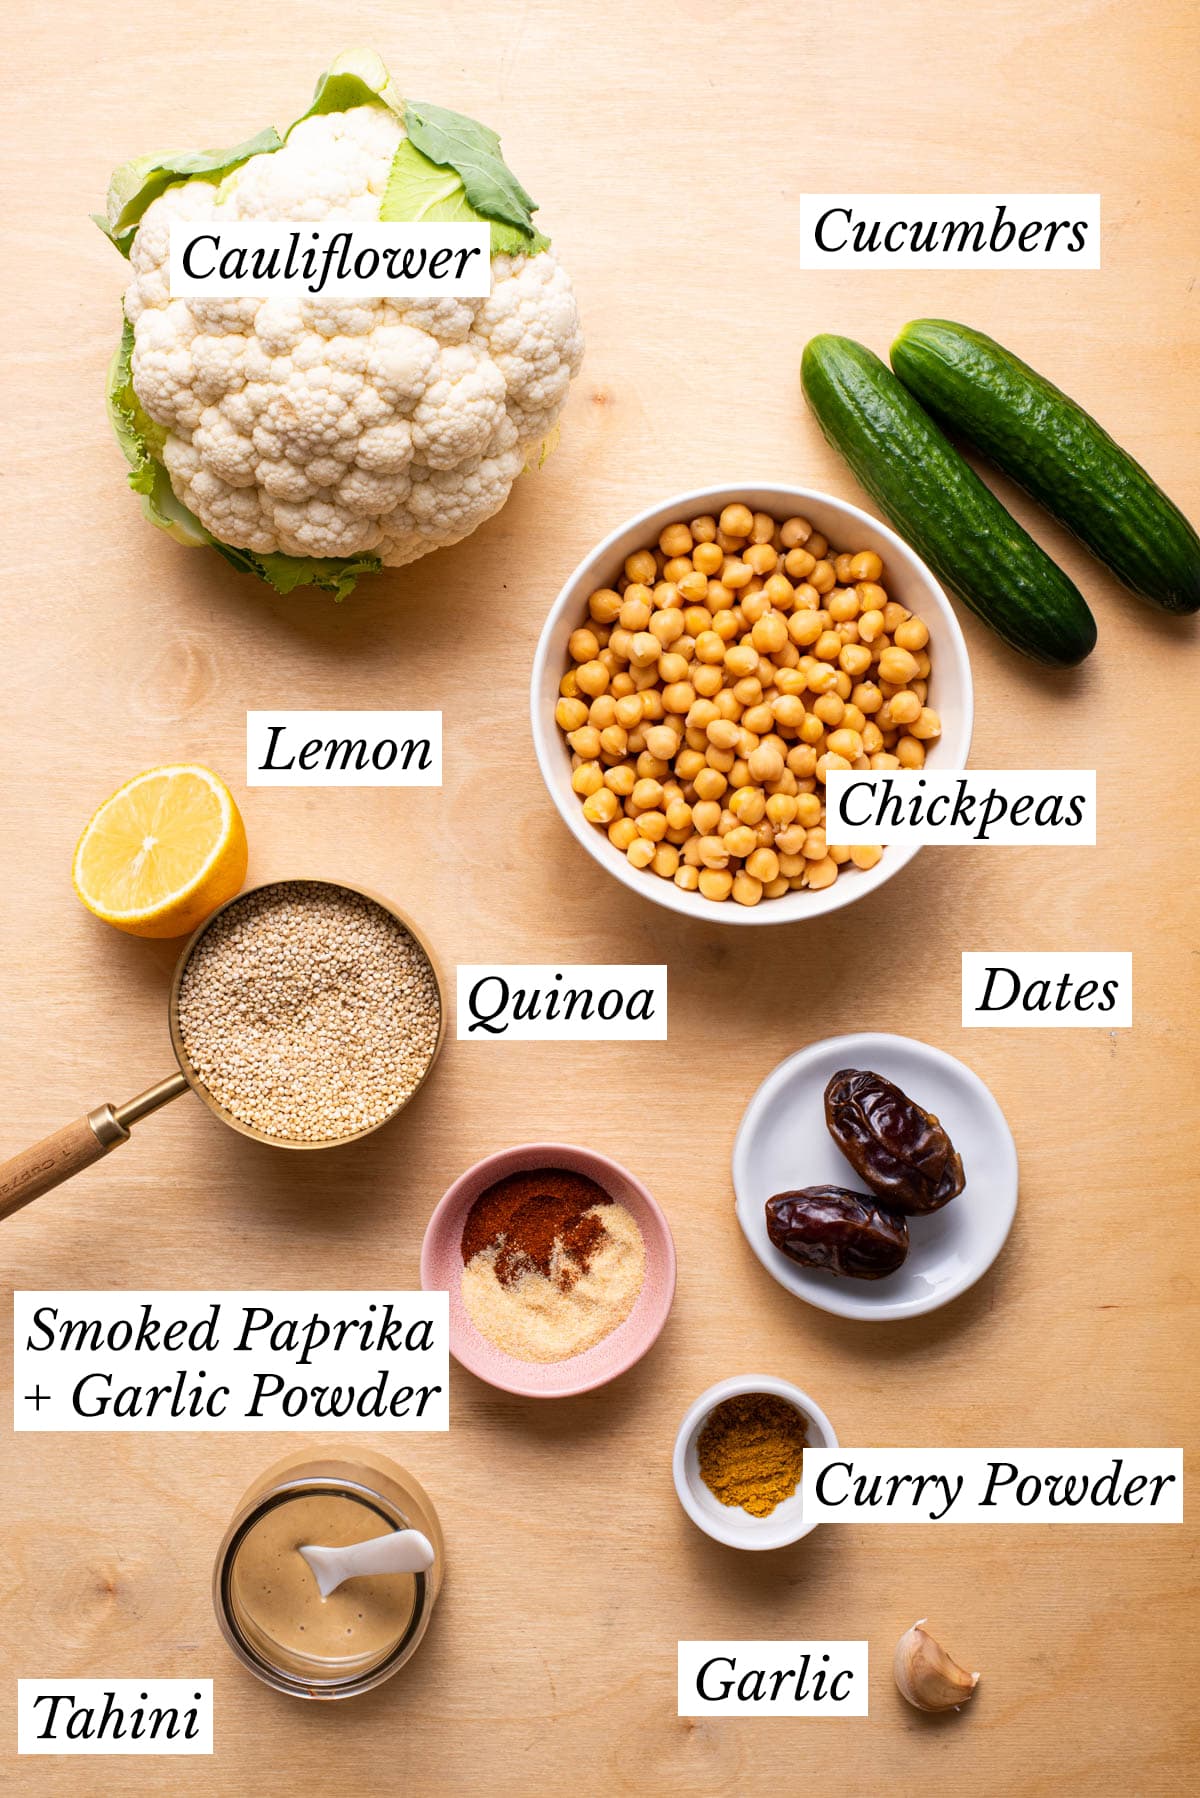 Ingredients gathered to make vegan quinoa bowls with roasted cauliflower and chickpeas.